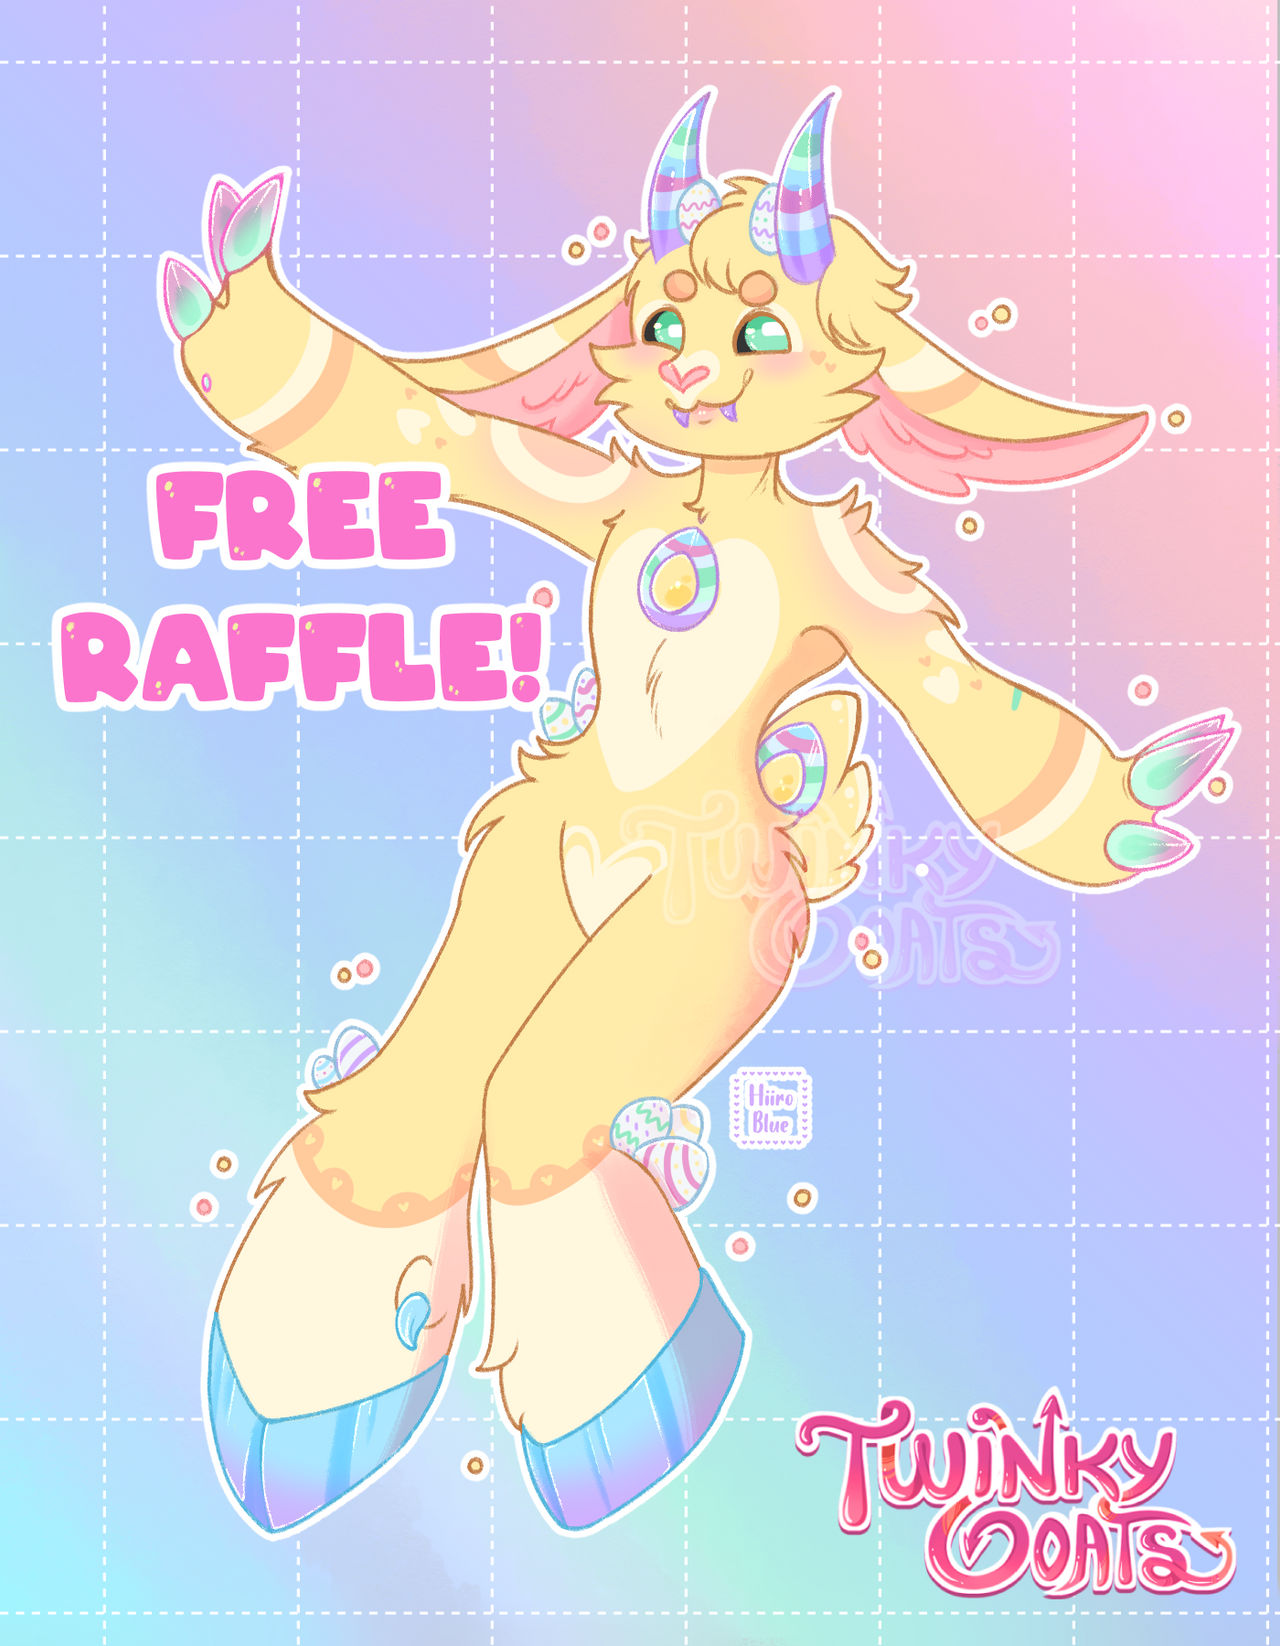 twinky_goats_easter_raffle__open__by_reb